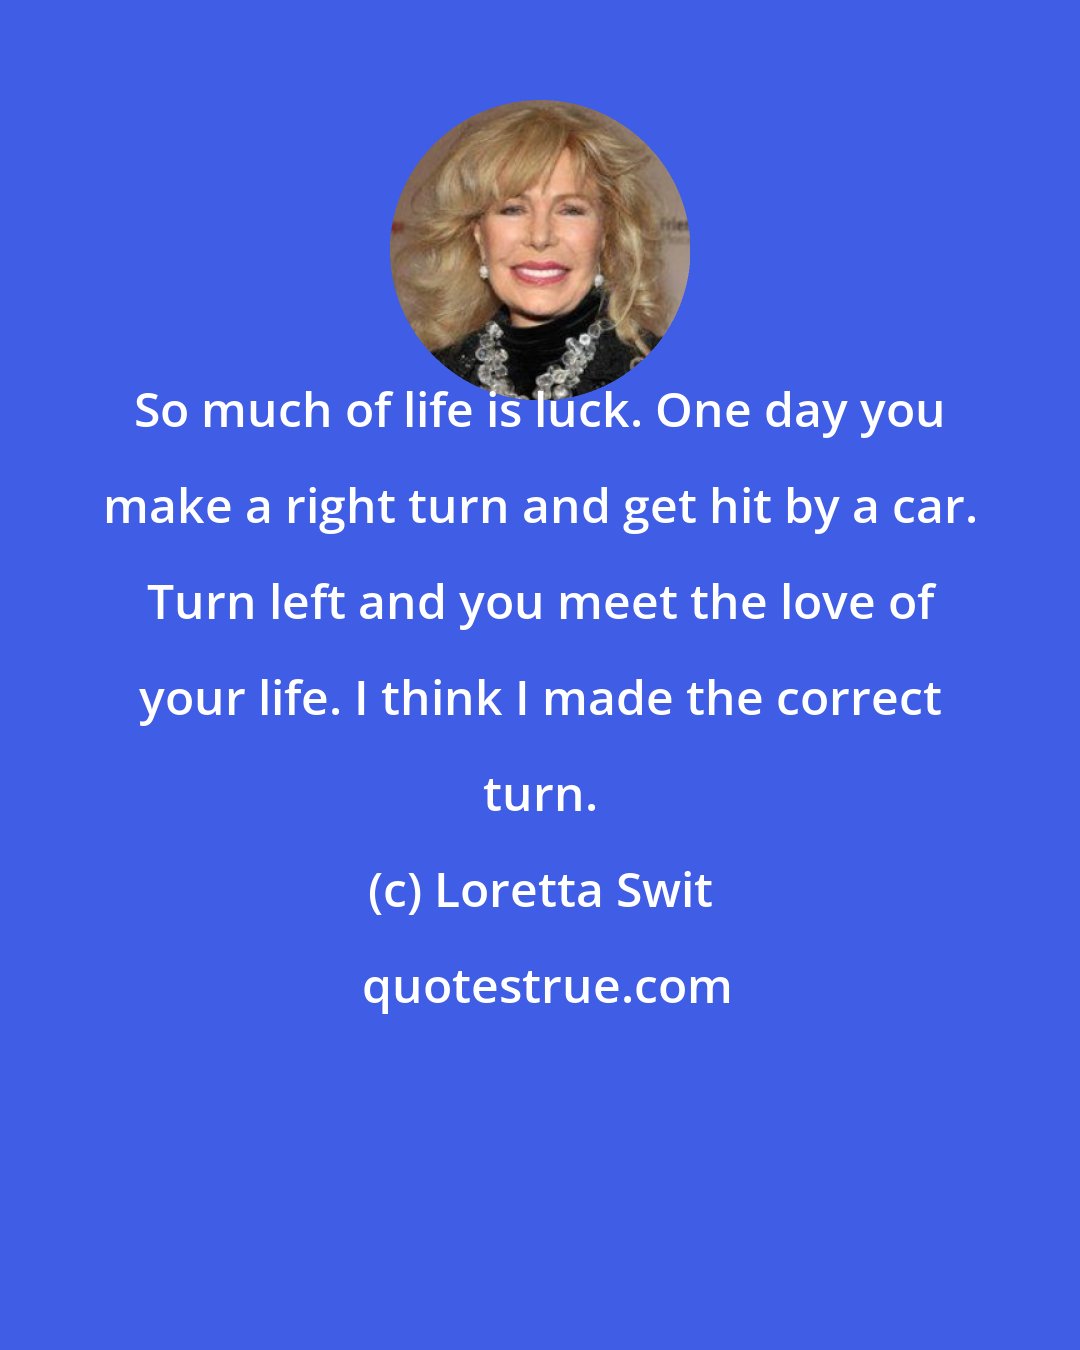 Loretta Swit: So much of life is luck. One day you make a right turn and get hit by a car. Turn left and you meet the love of your life. I think I made the correct turn.